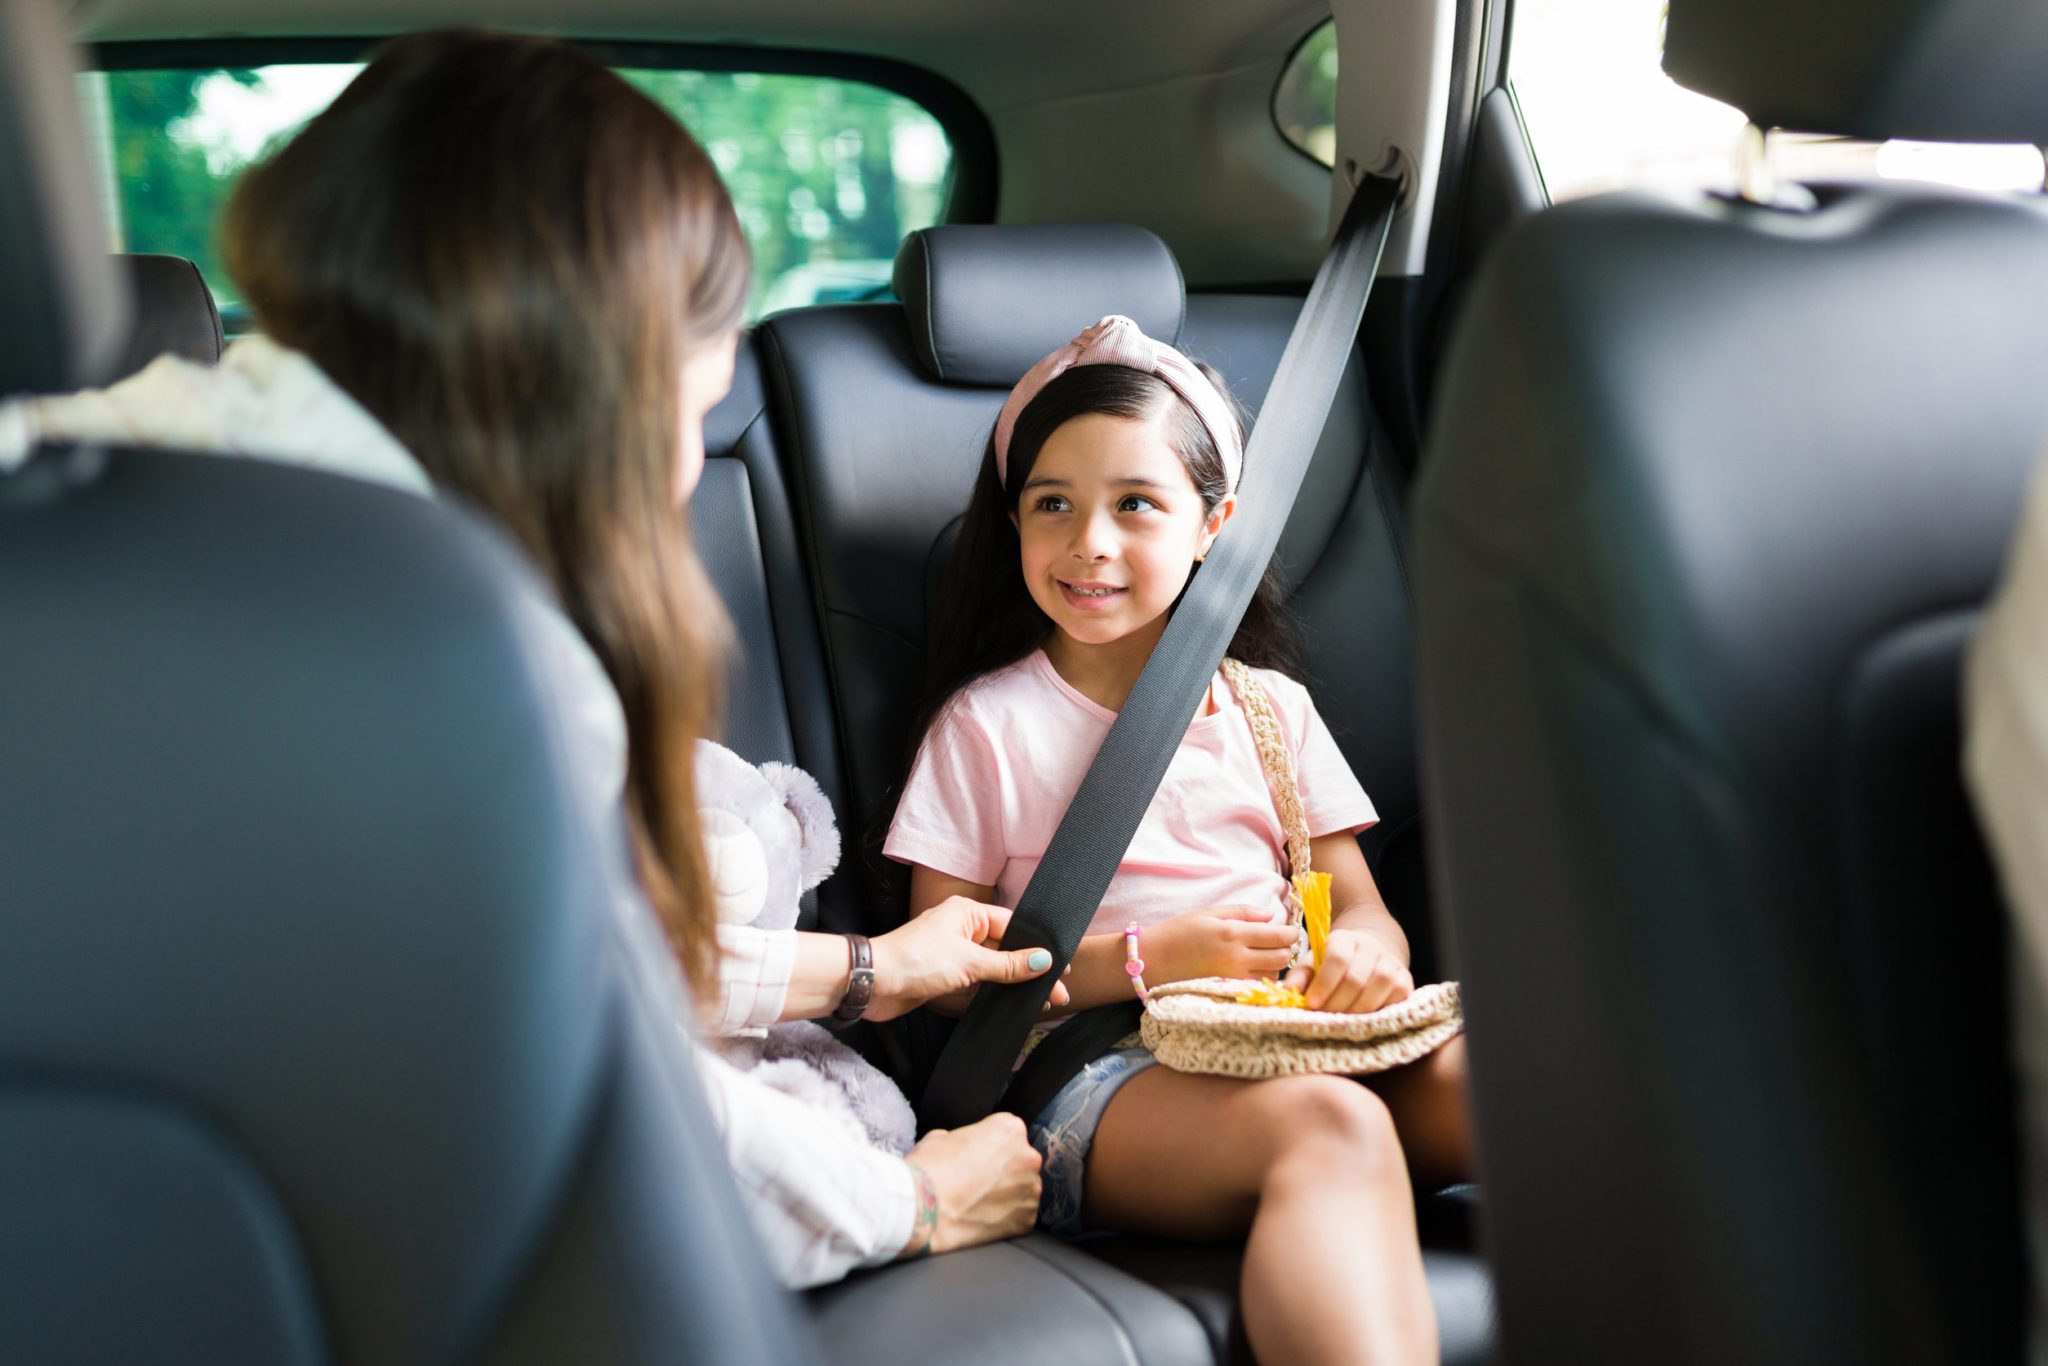 What Are the Laws in Florida for Child Restraints in Vehicles?